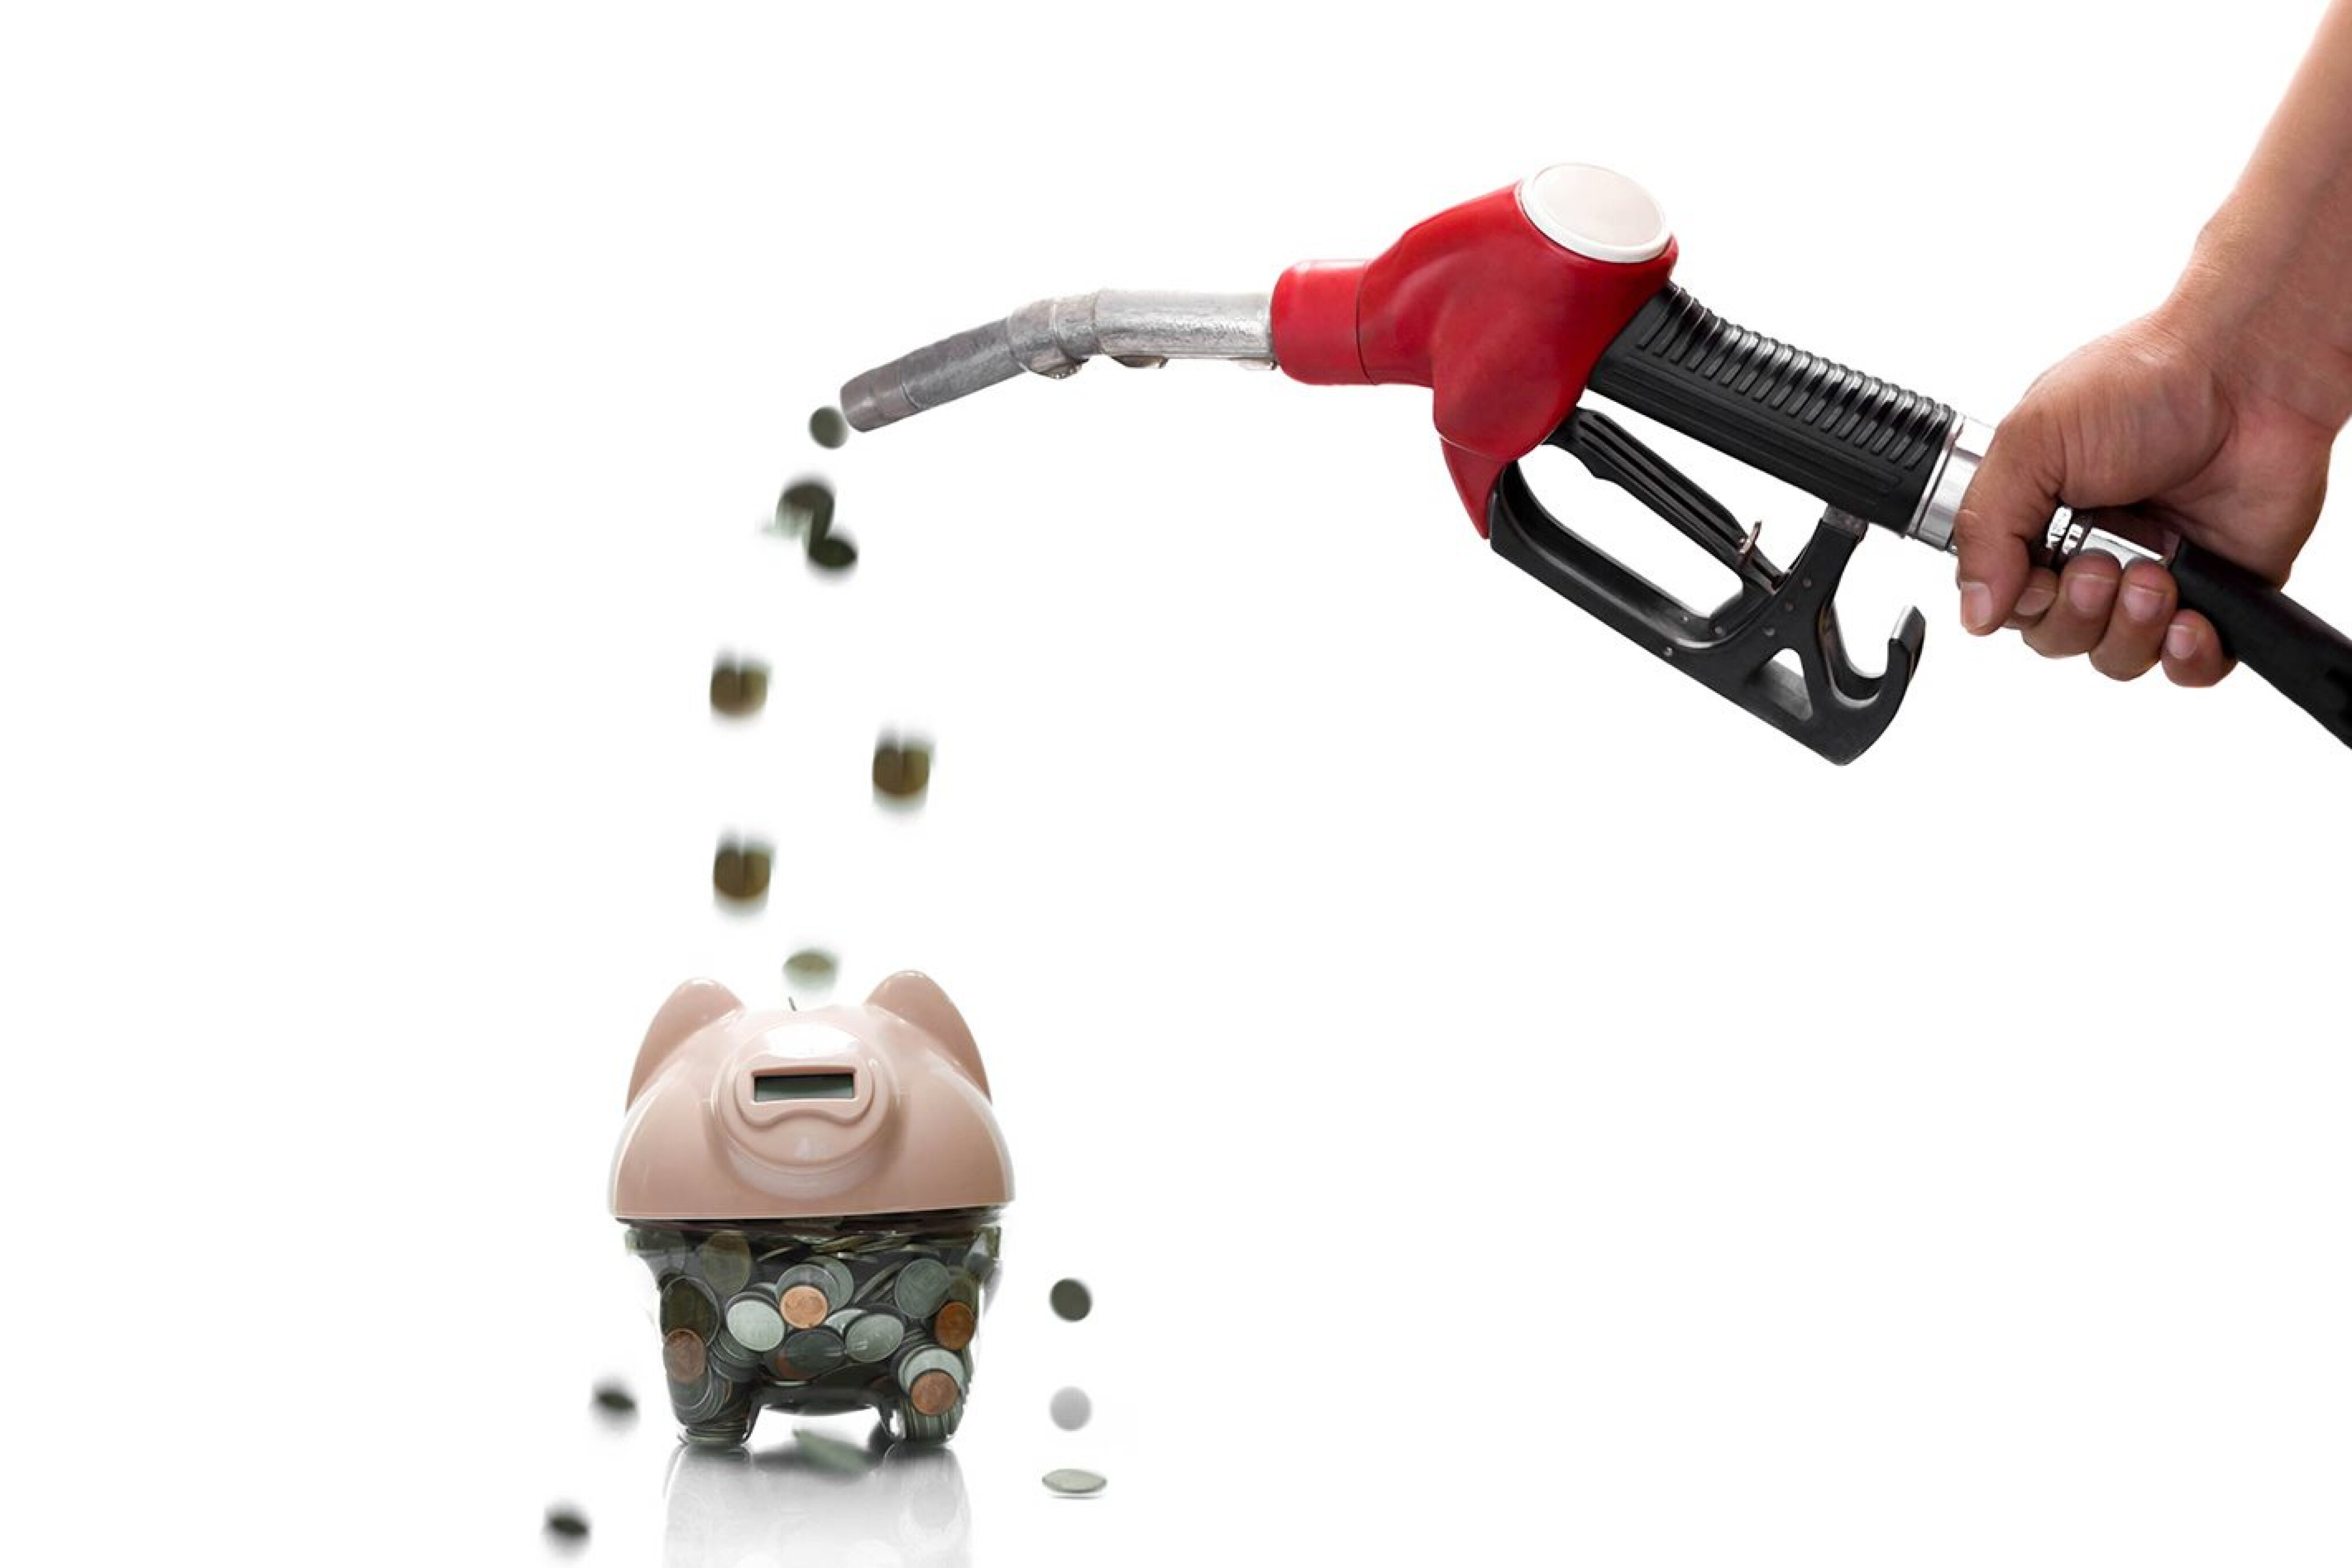 bc210a12/fuel pump dollars and cents falling out jpg